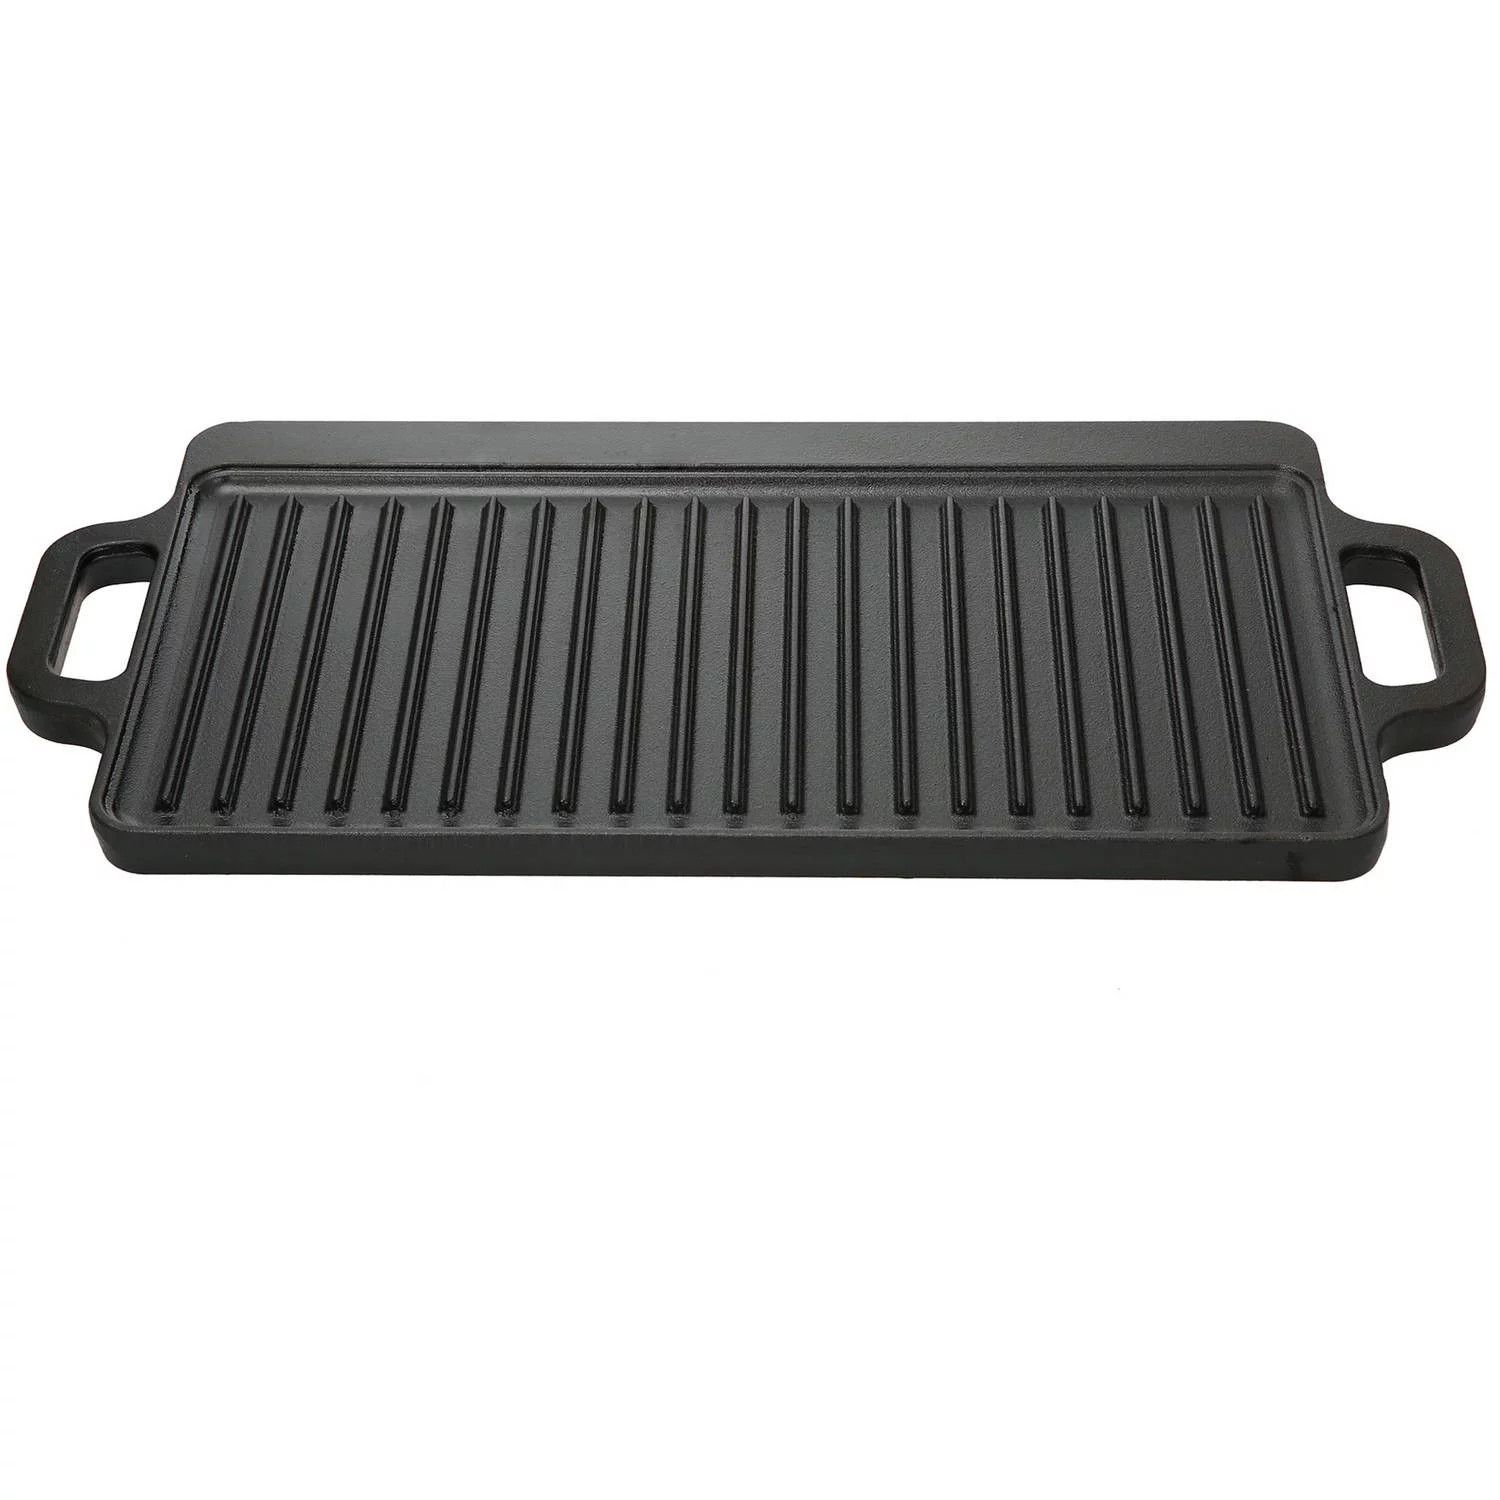 Ozark Trail 9 in Cast Iron Griddle (Reversible, 16.5 x 9 in) | Walmart (US)